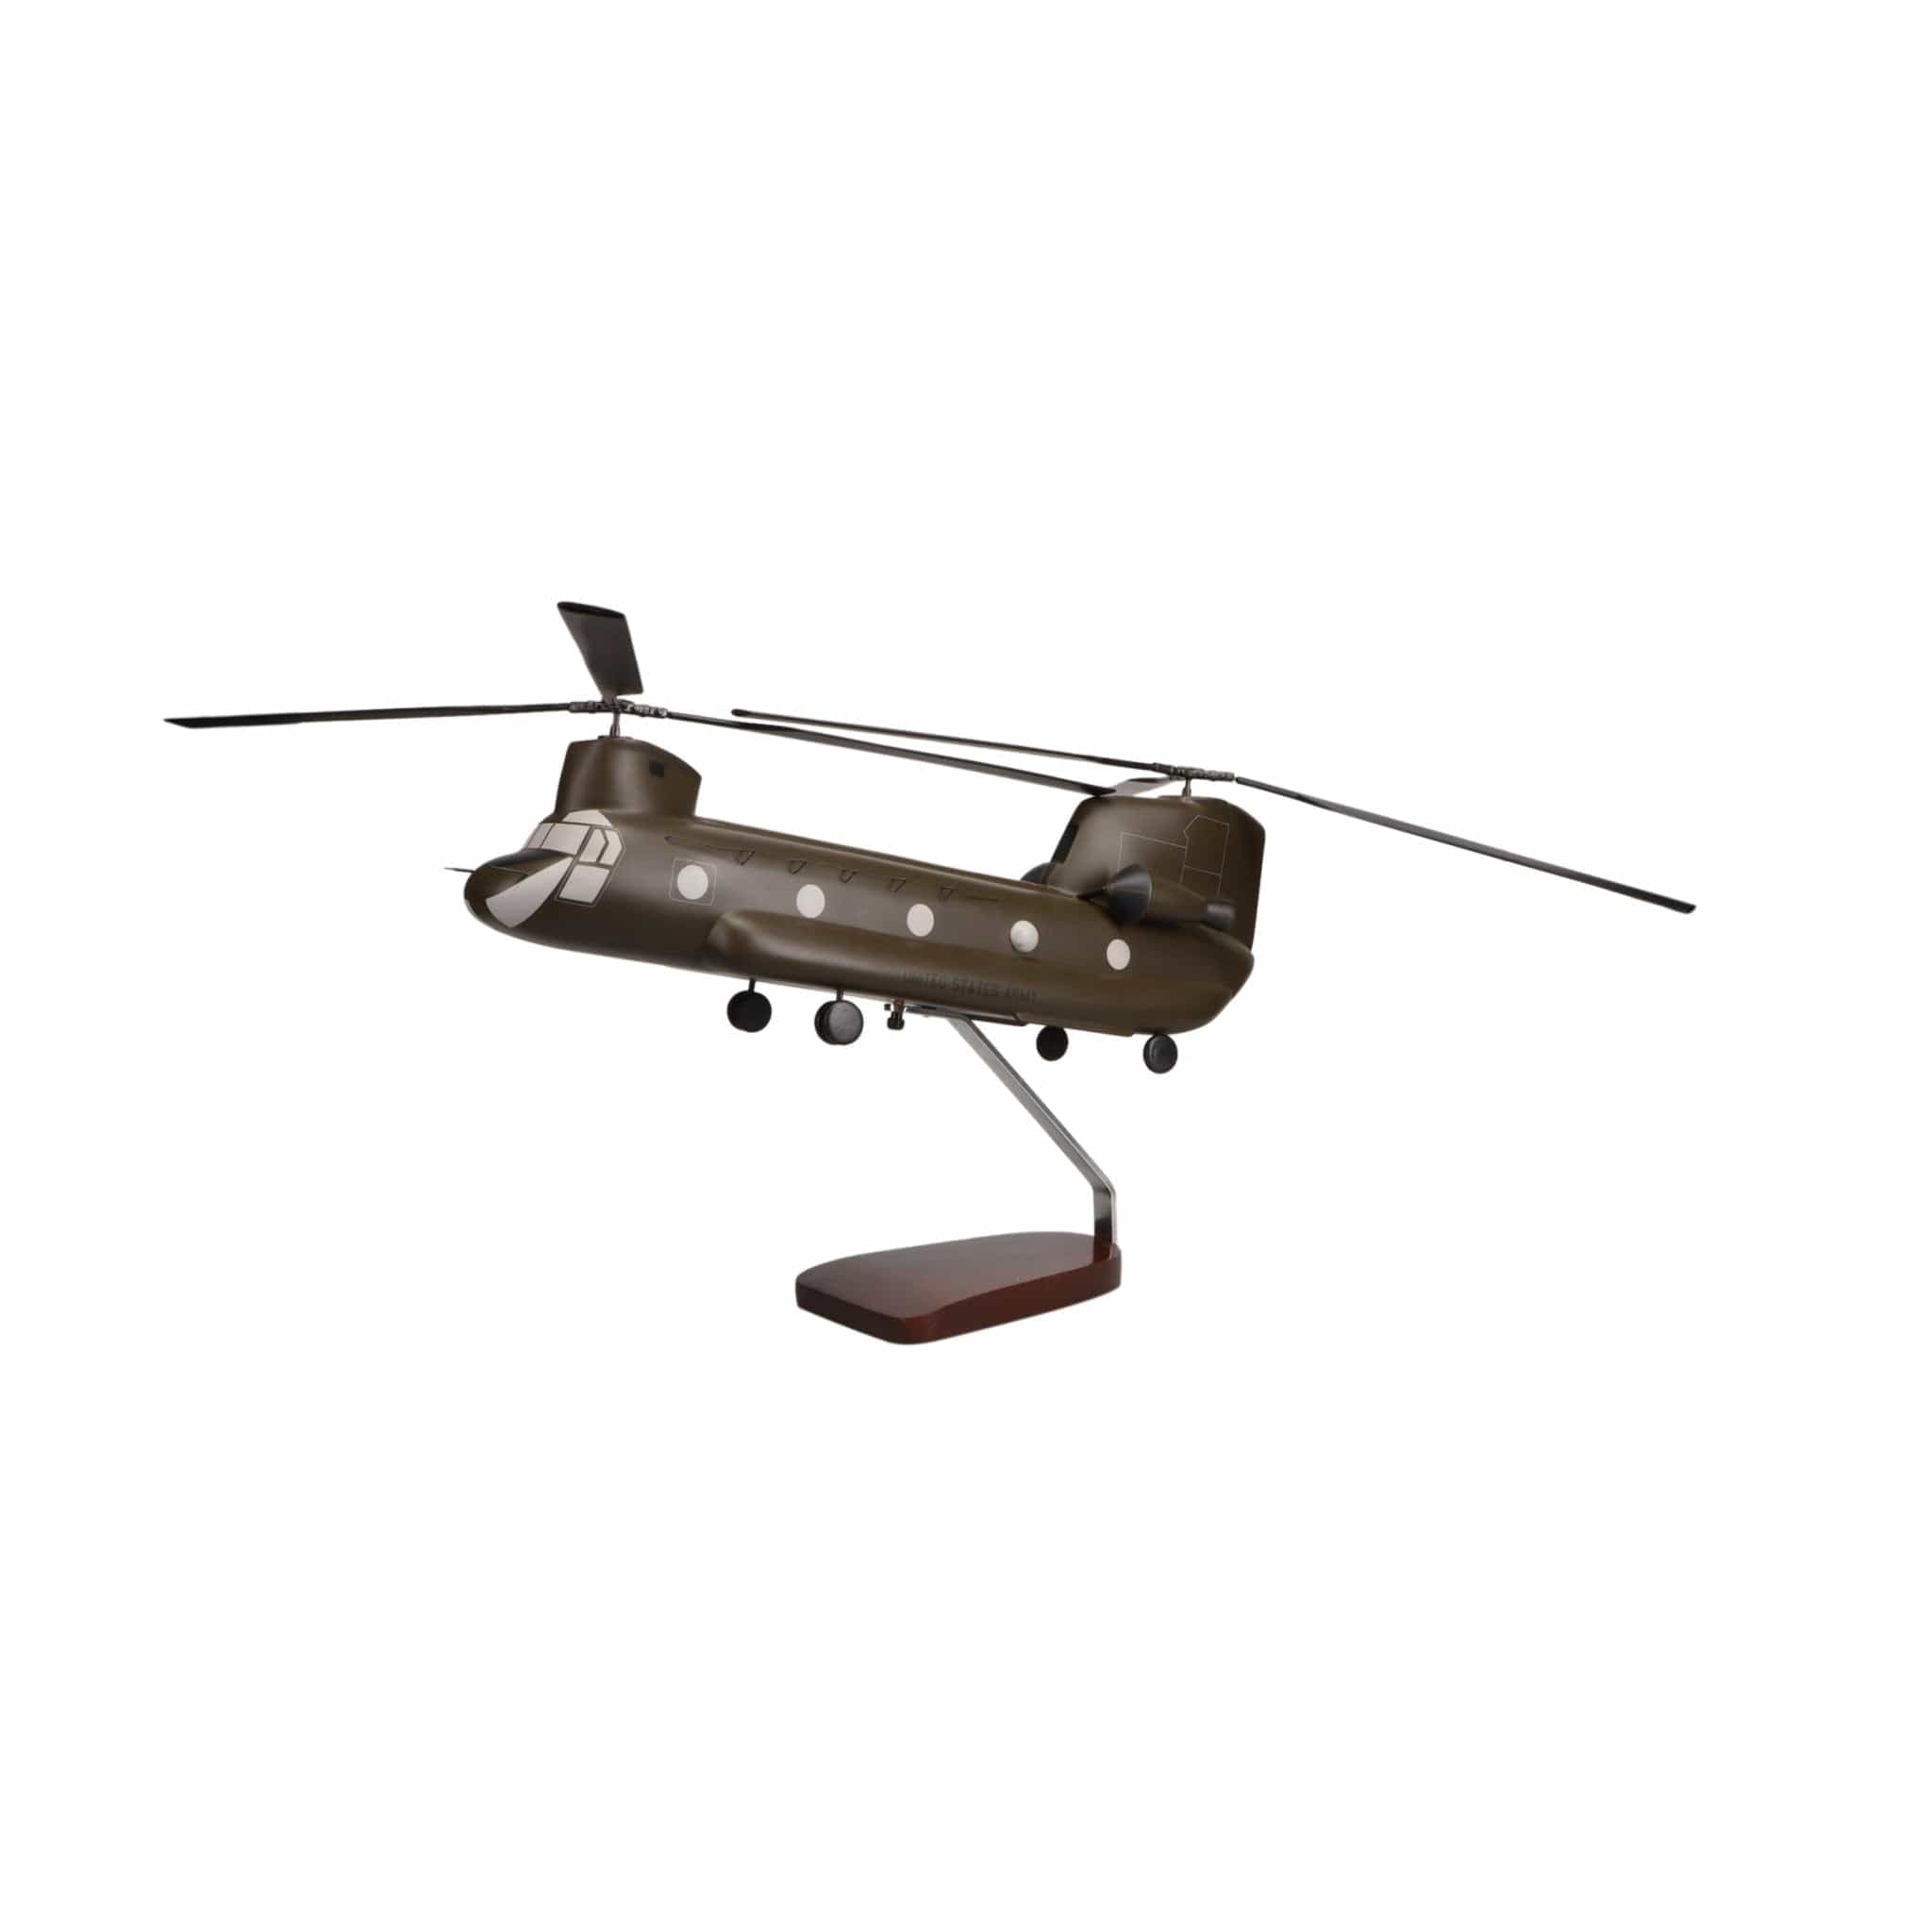 Boeing™ CH-47D Chinook Large Mahogany Model